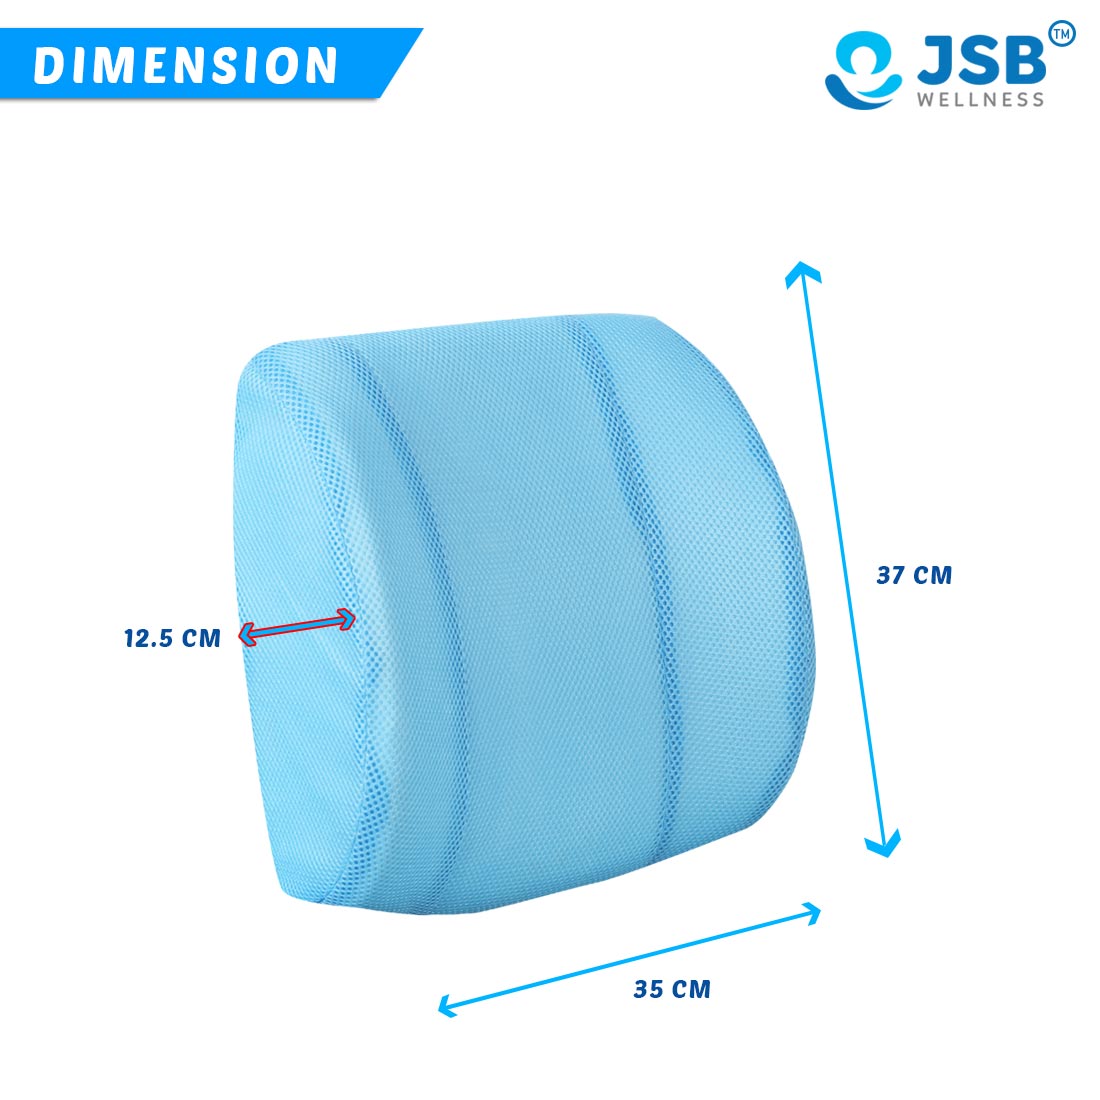 lower back support for chair jsb mf007 dimension